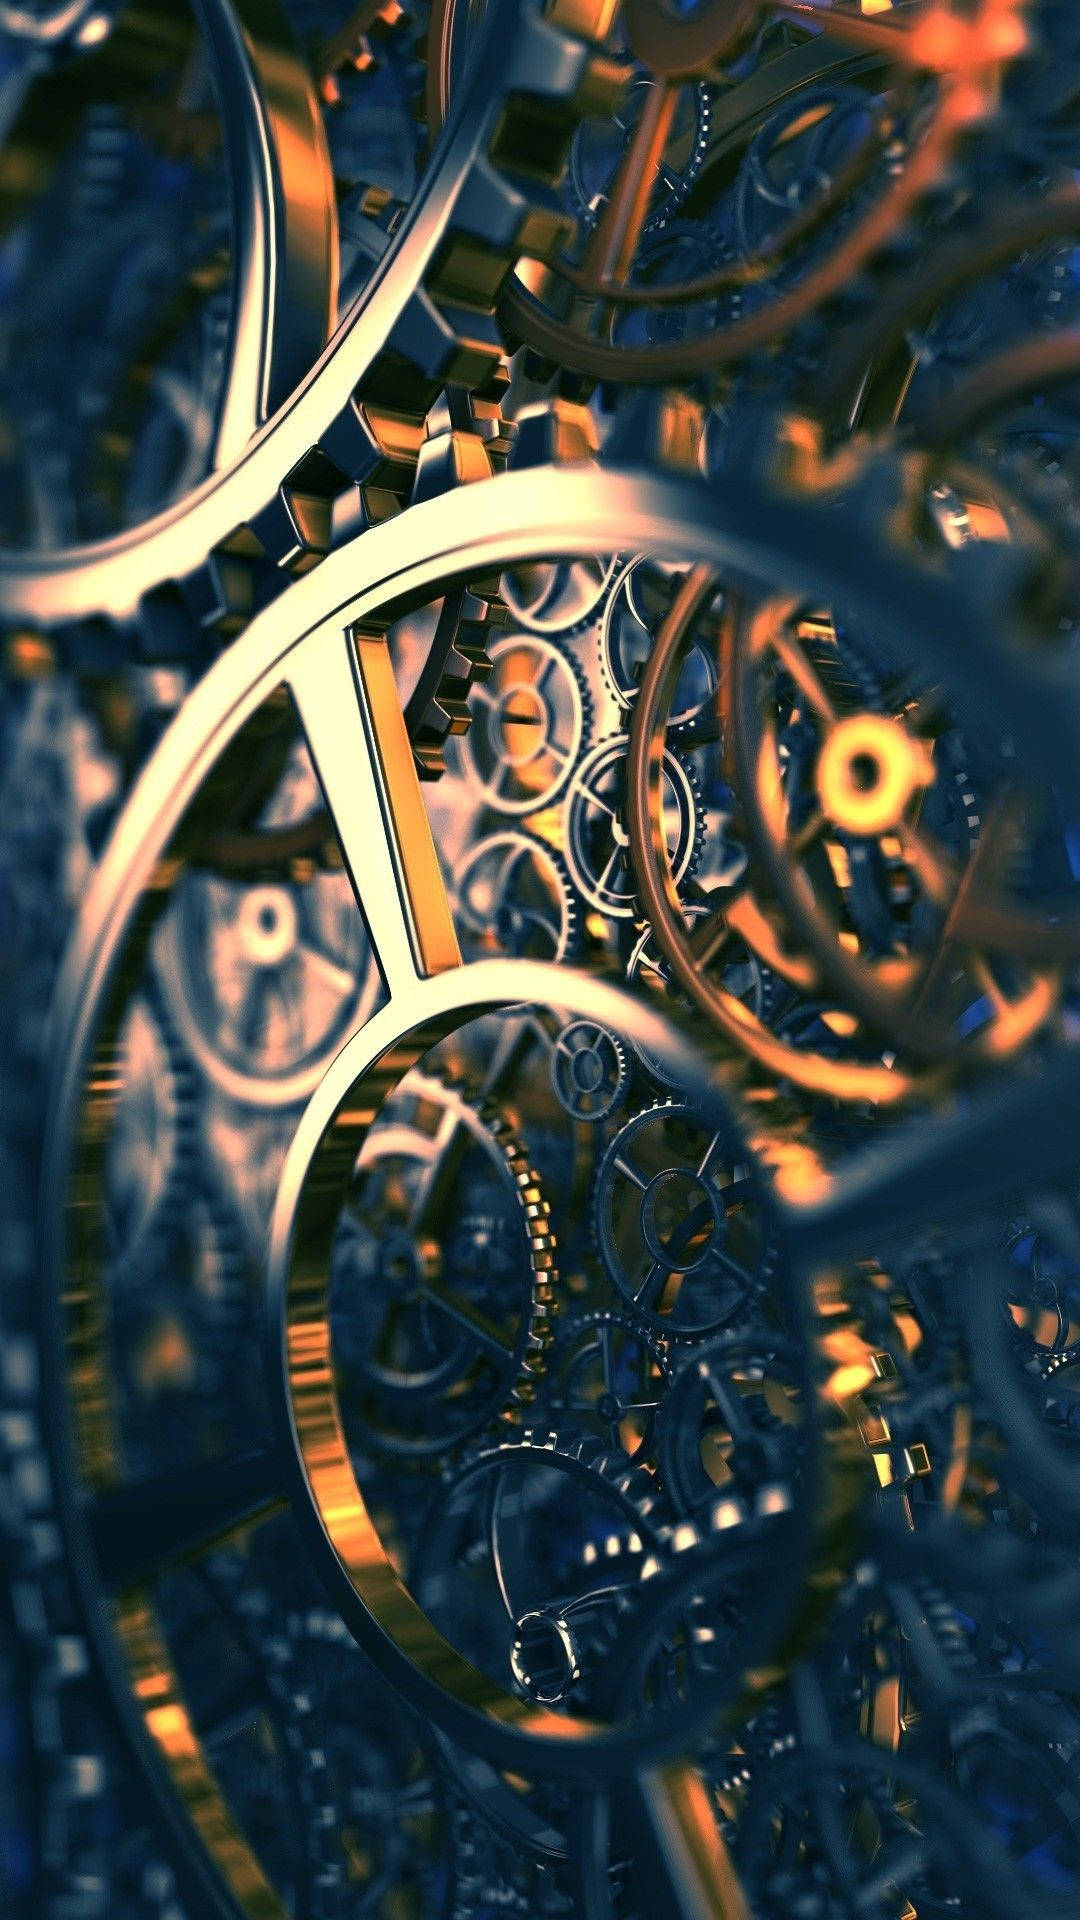 Iphone 6s Live Cogs And Gears Wallpaper